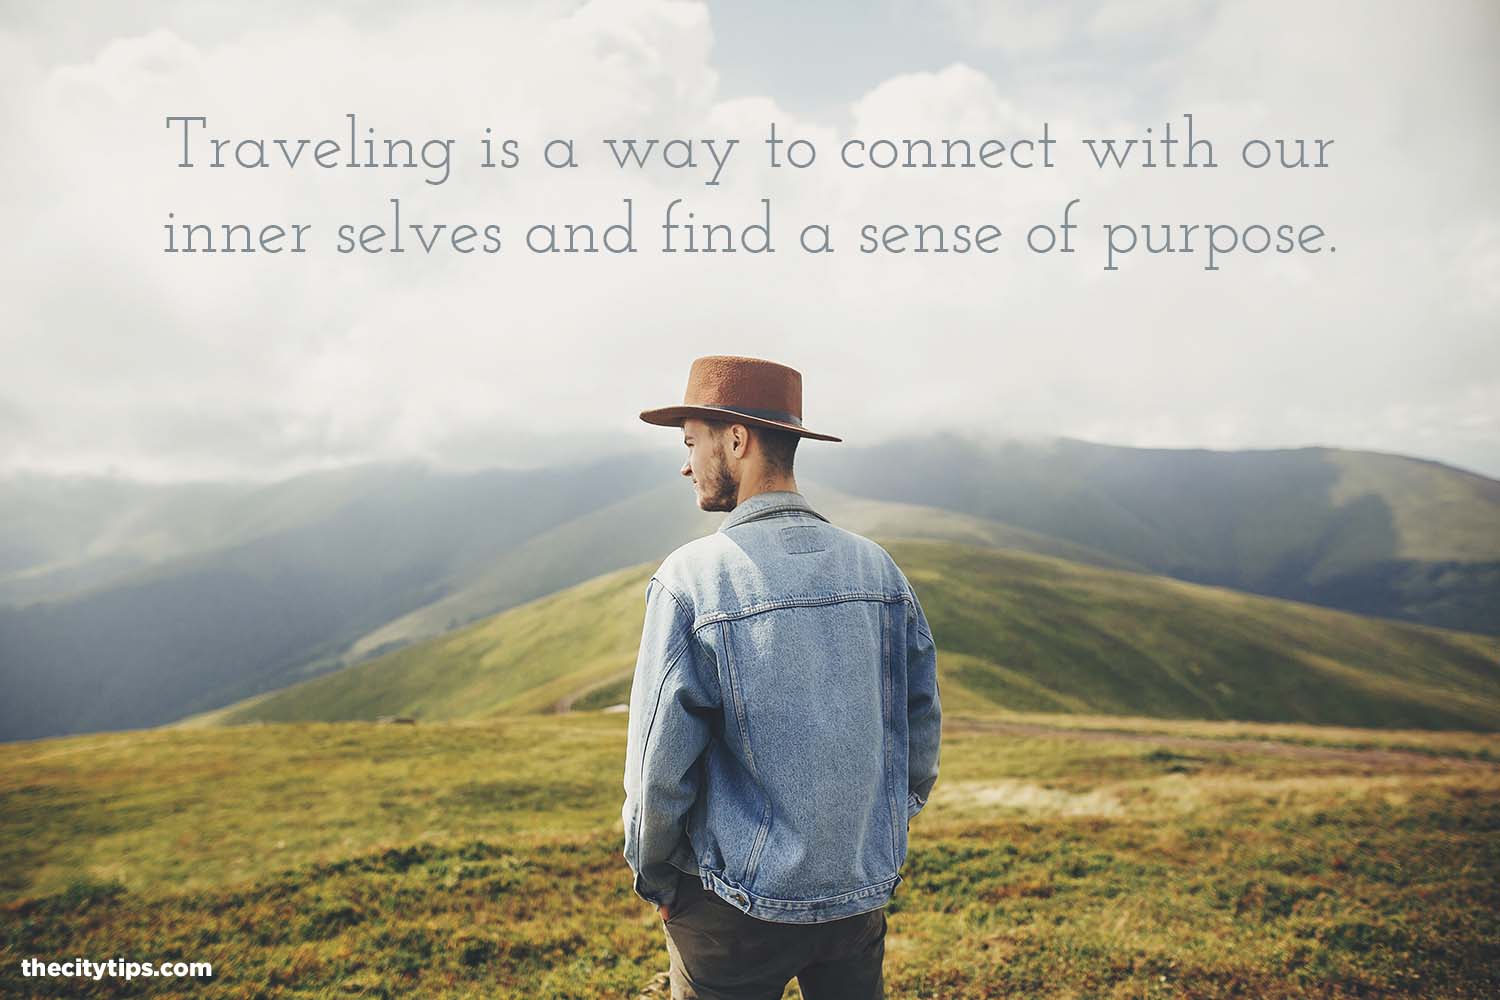 "Traveling is a way to connect with our inner selves and find a sense of purpose." by Anonymous